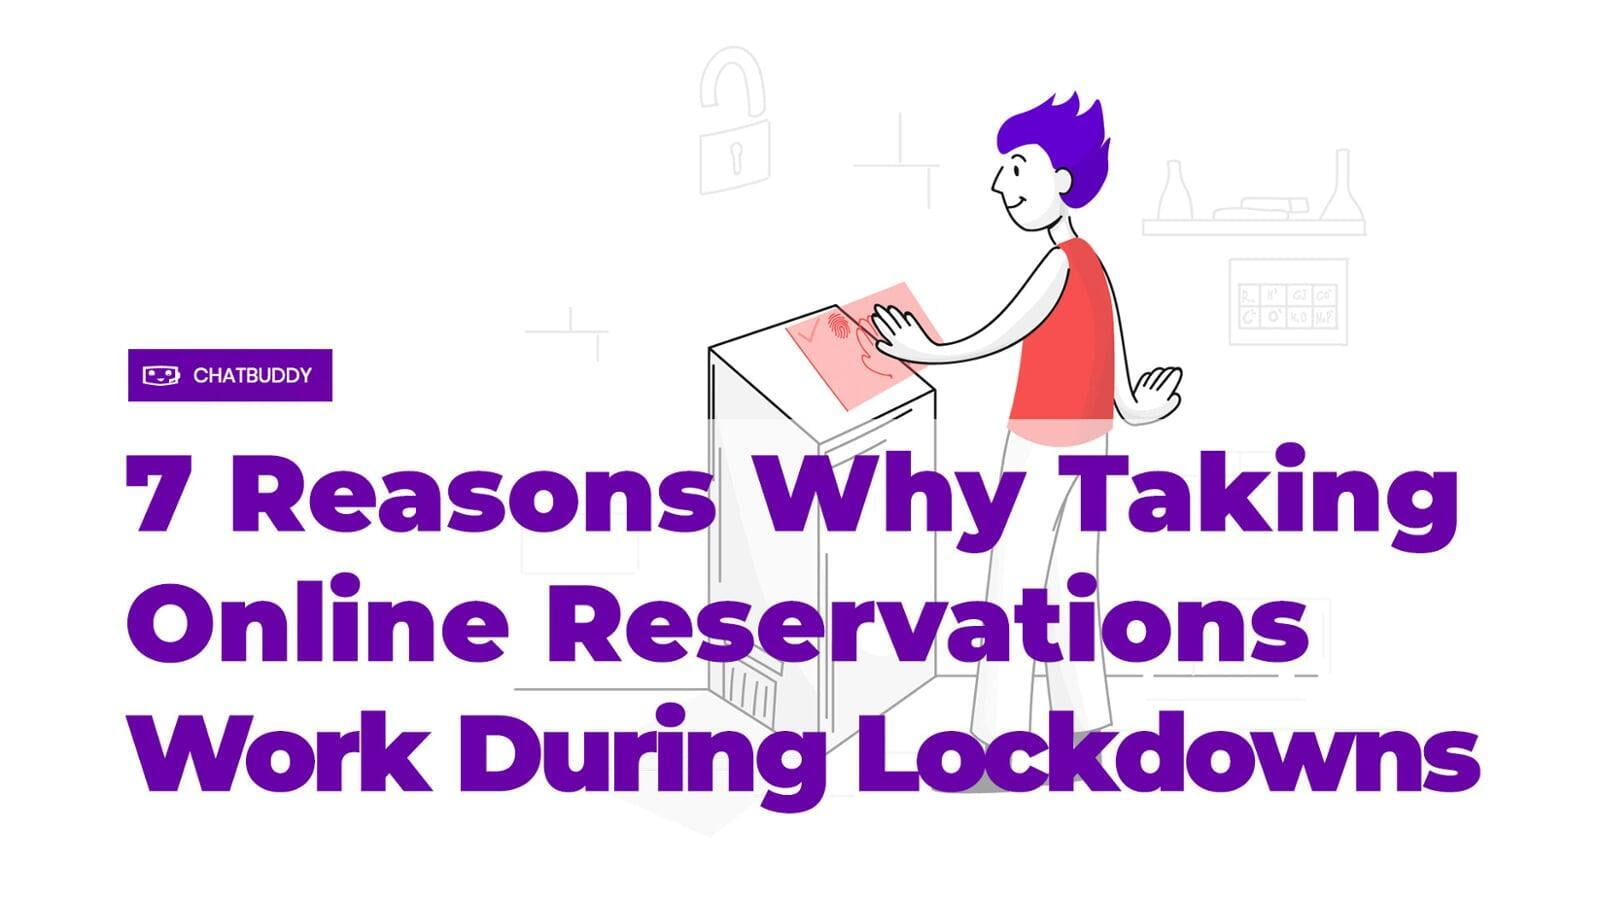 7 Reasons Why Taking Online Reservations Work During Lockdowns